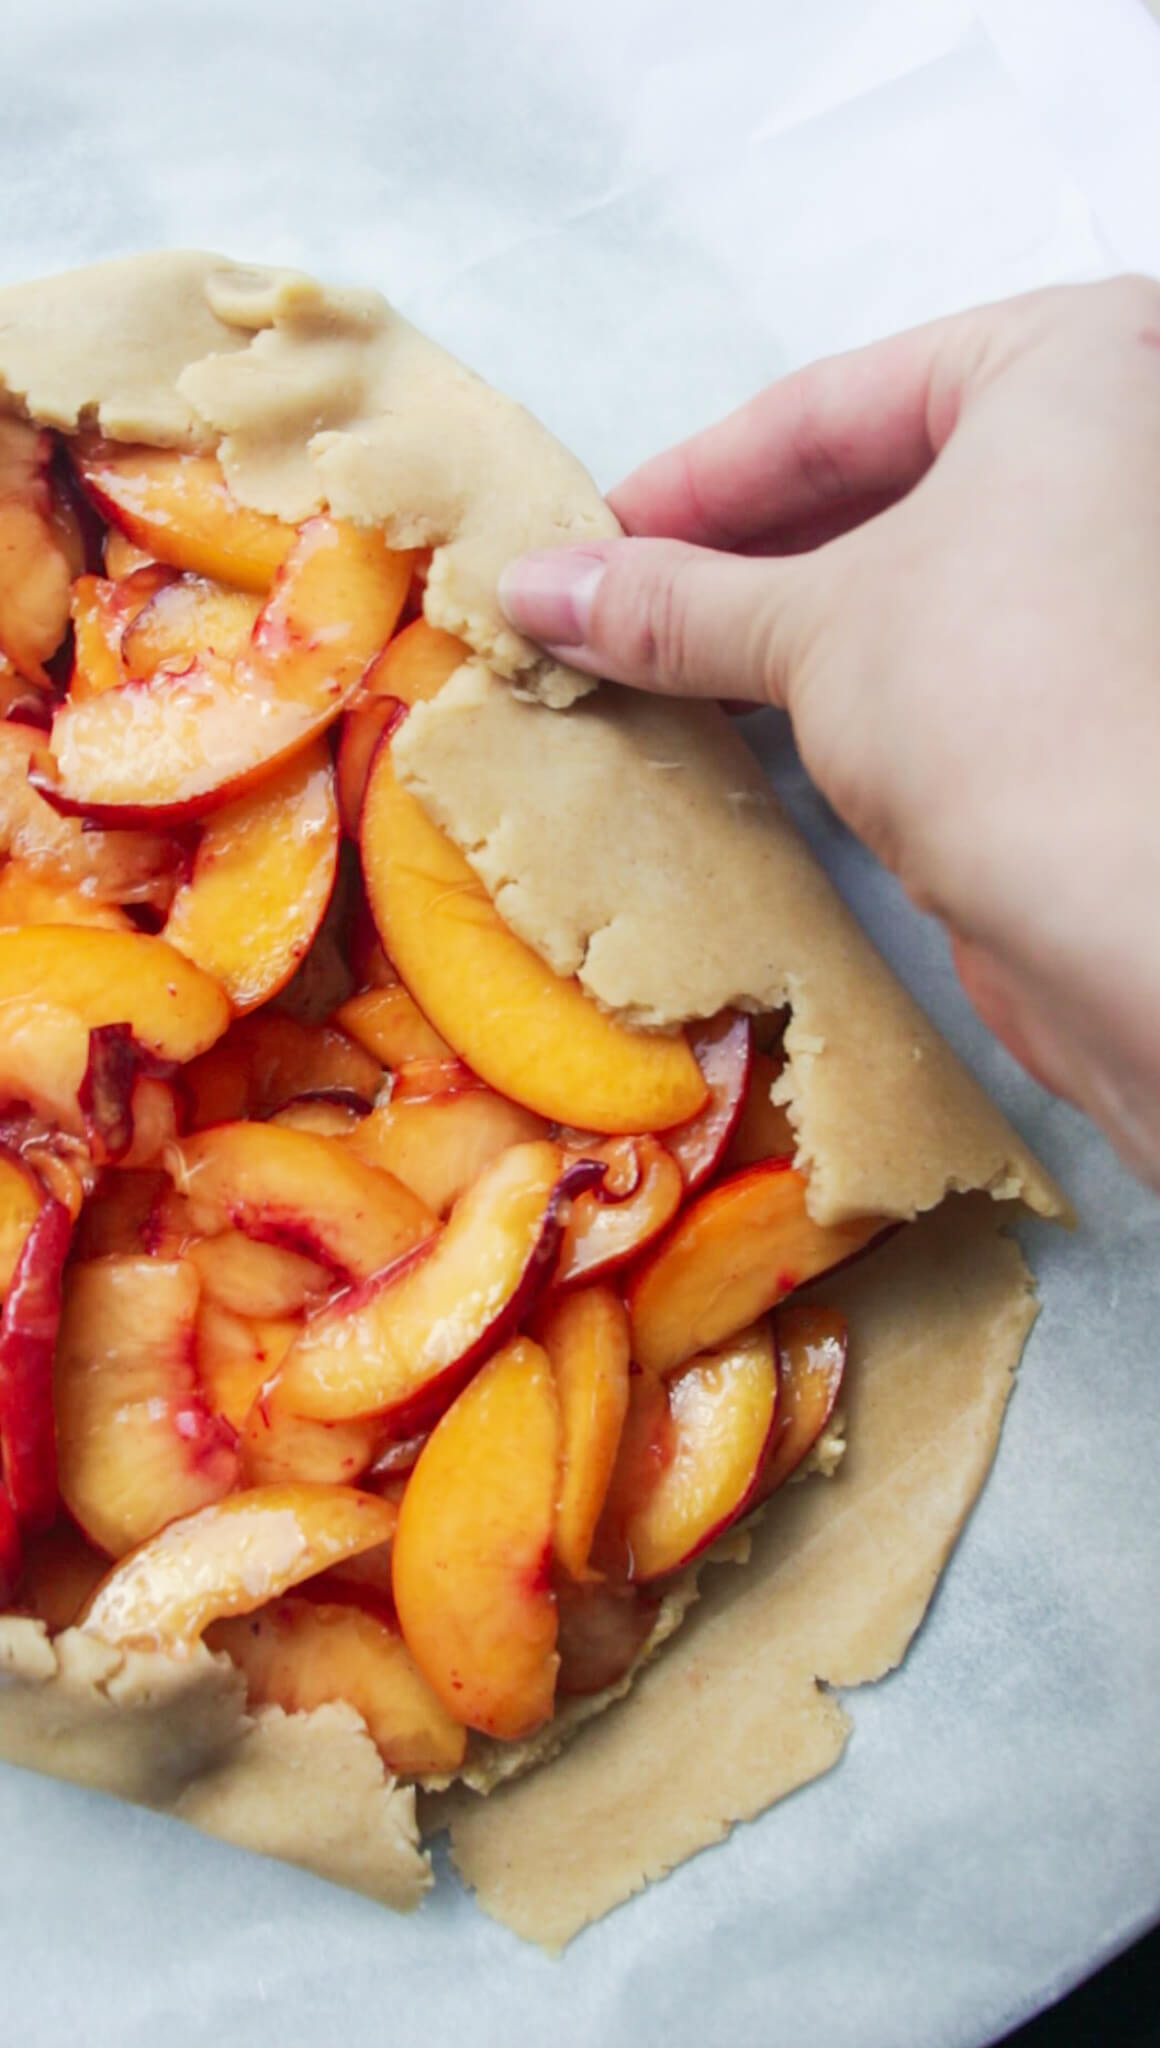 Hand folding pastry over peaches to form a galette.